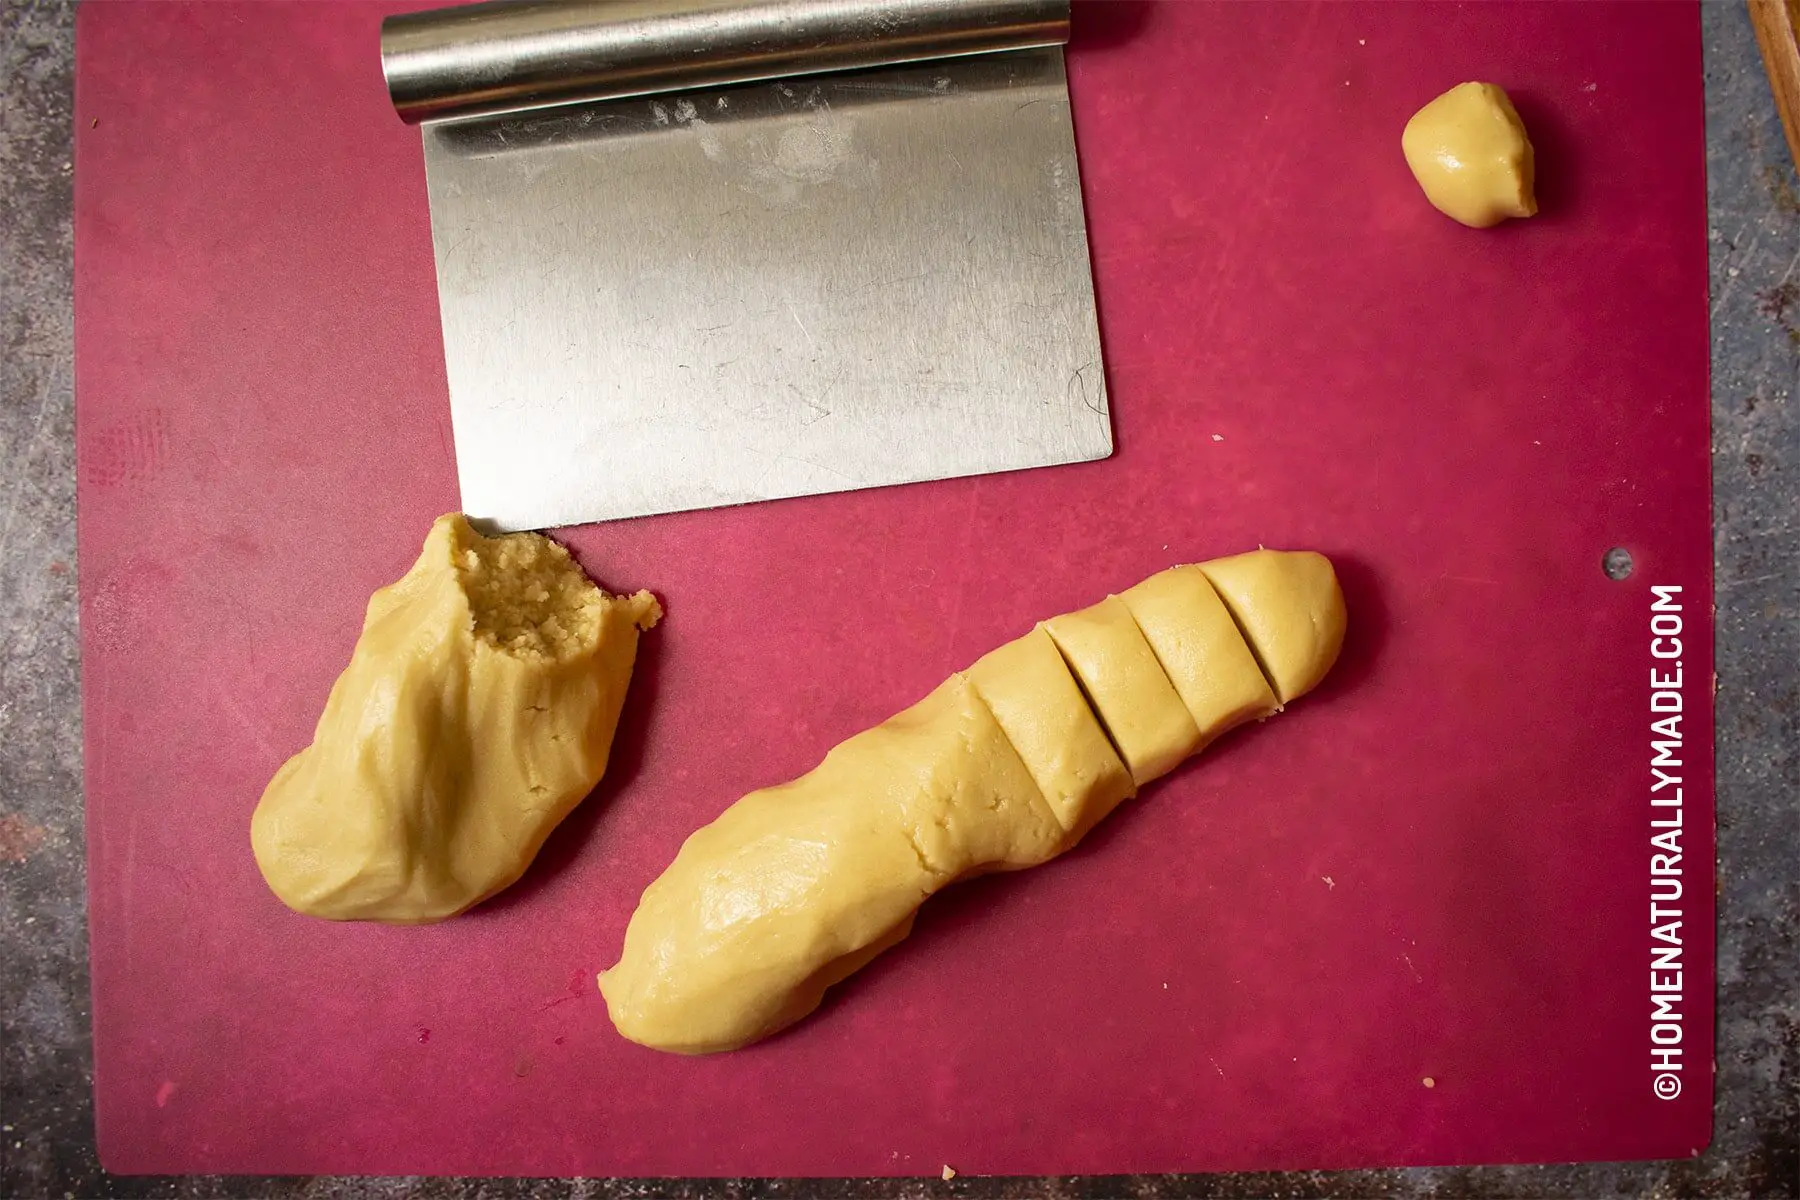 Divide oil-based dough into equal portions for flaky pastry wrappers